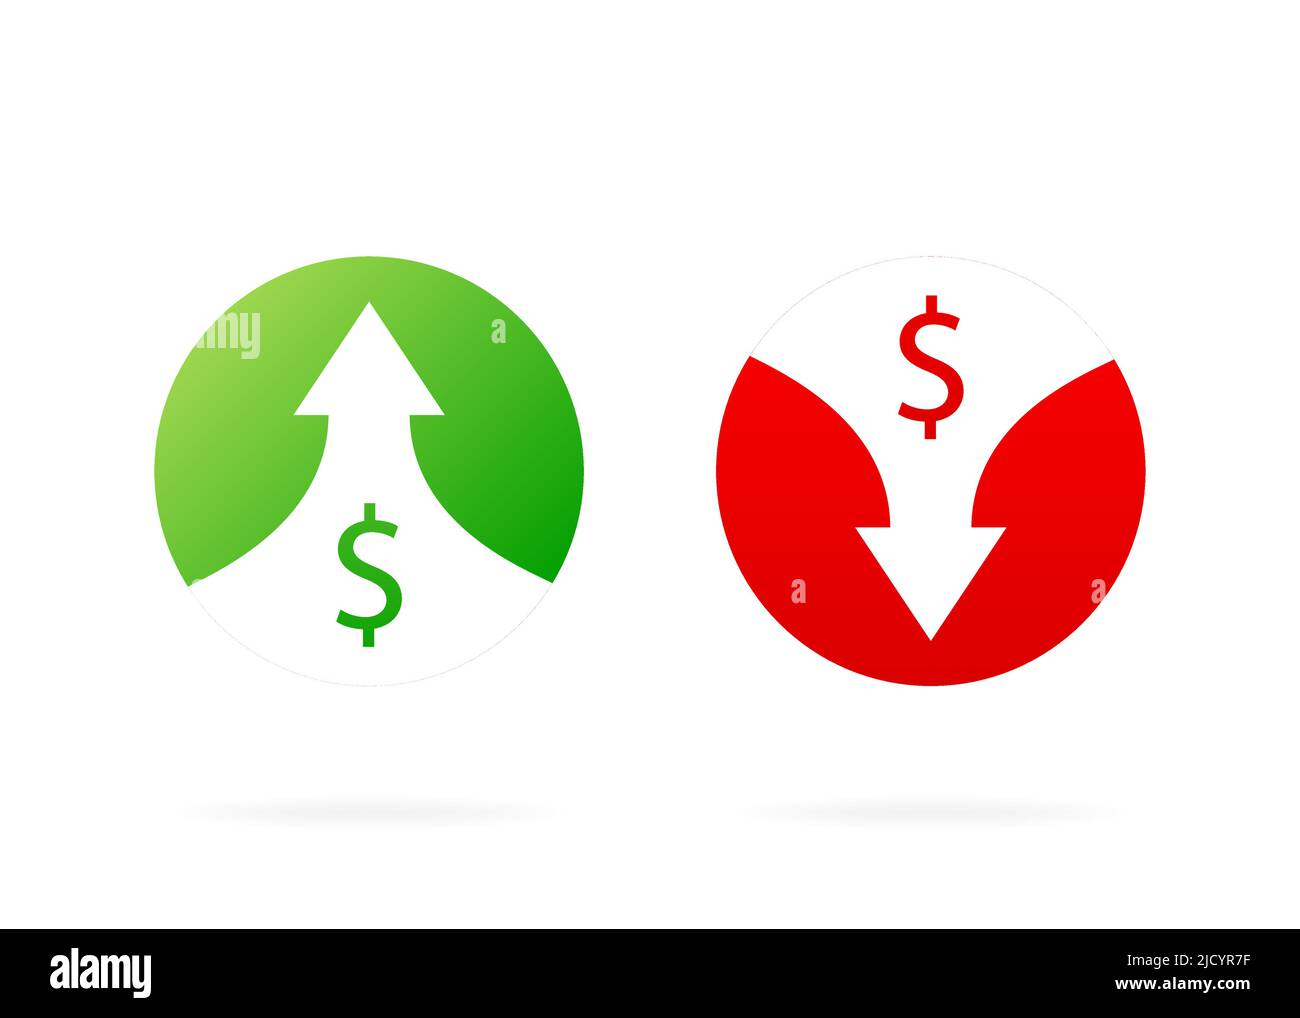 Up and down arrows. Red and Green icons. Illustration isolated on white background. Vector illustration with profit marks. Stock Vector